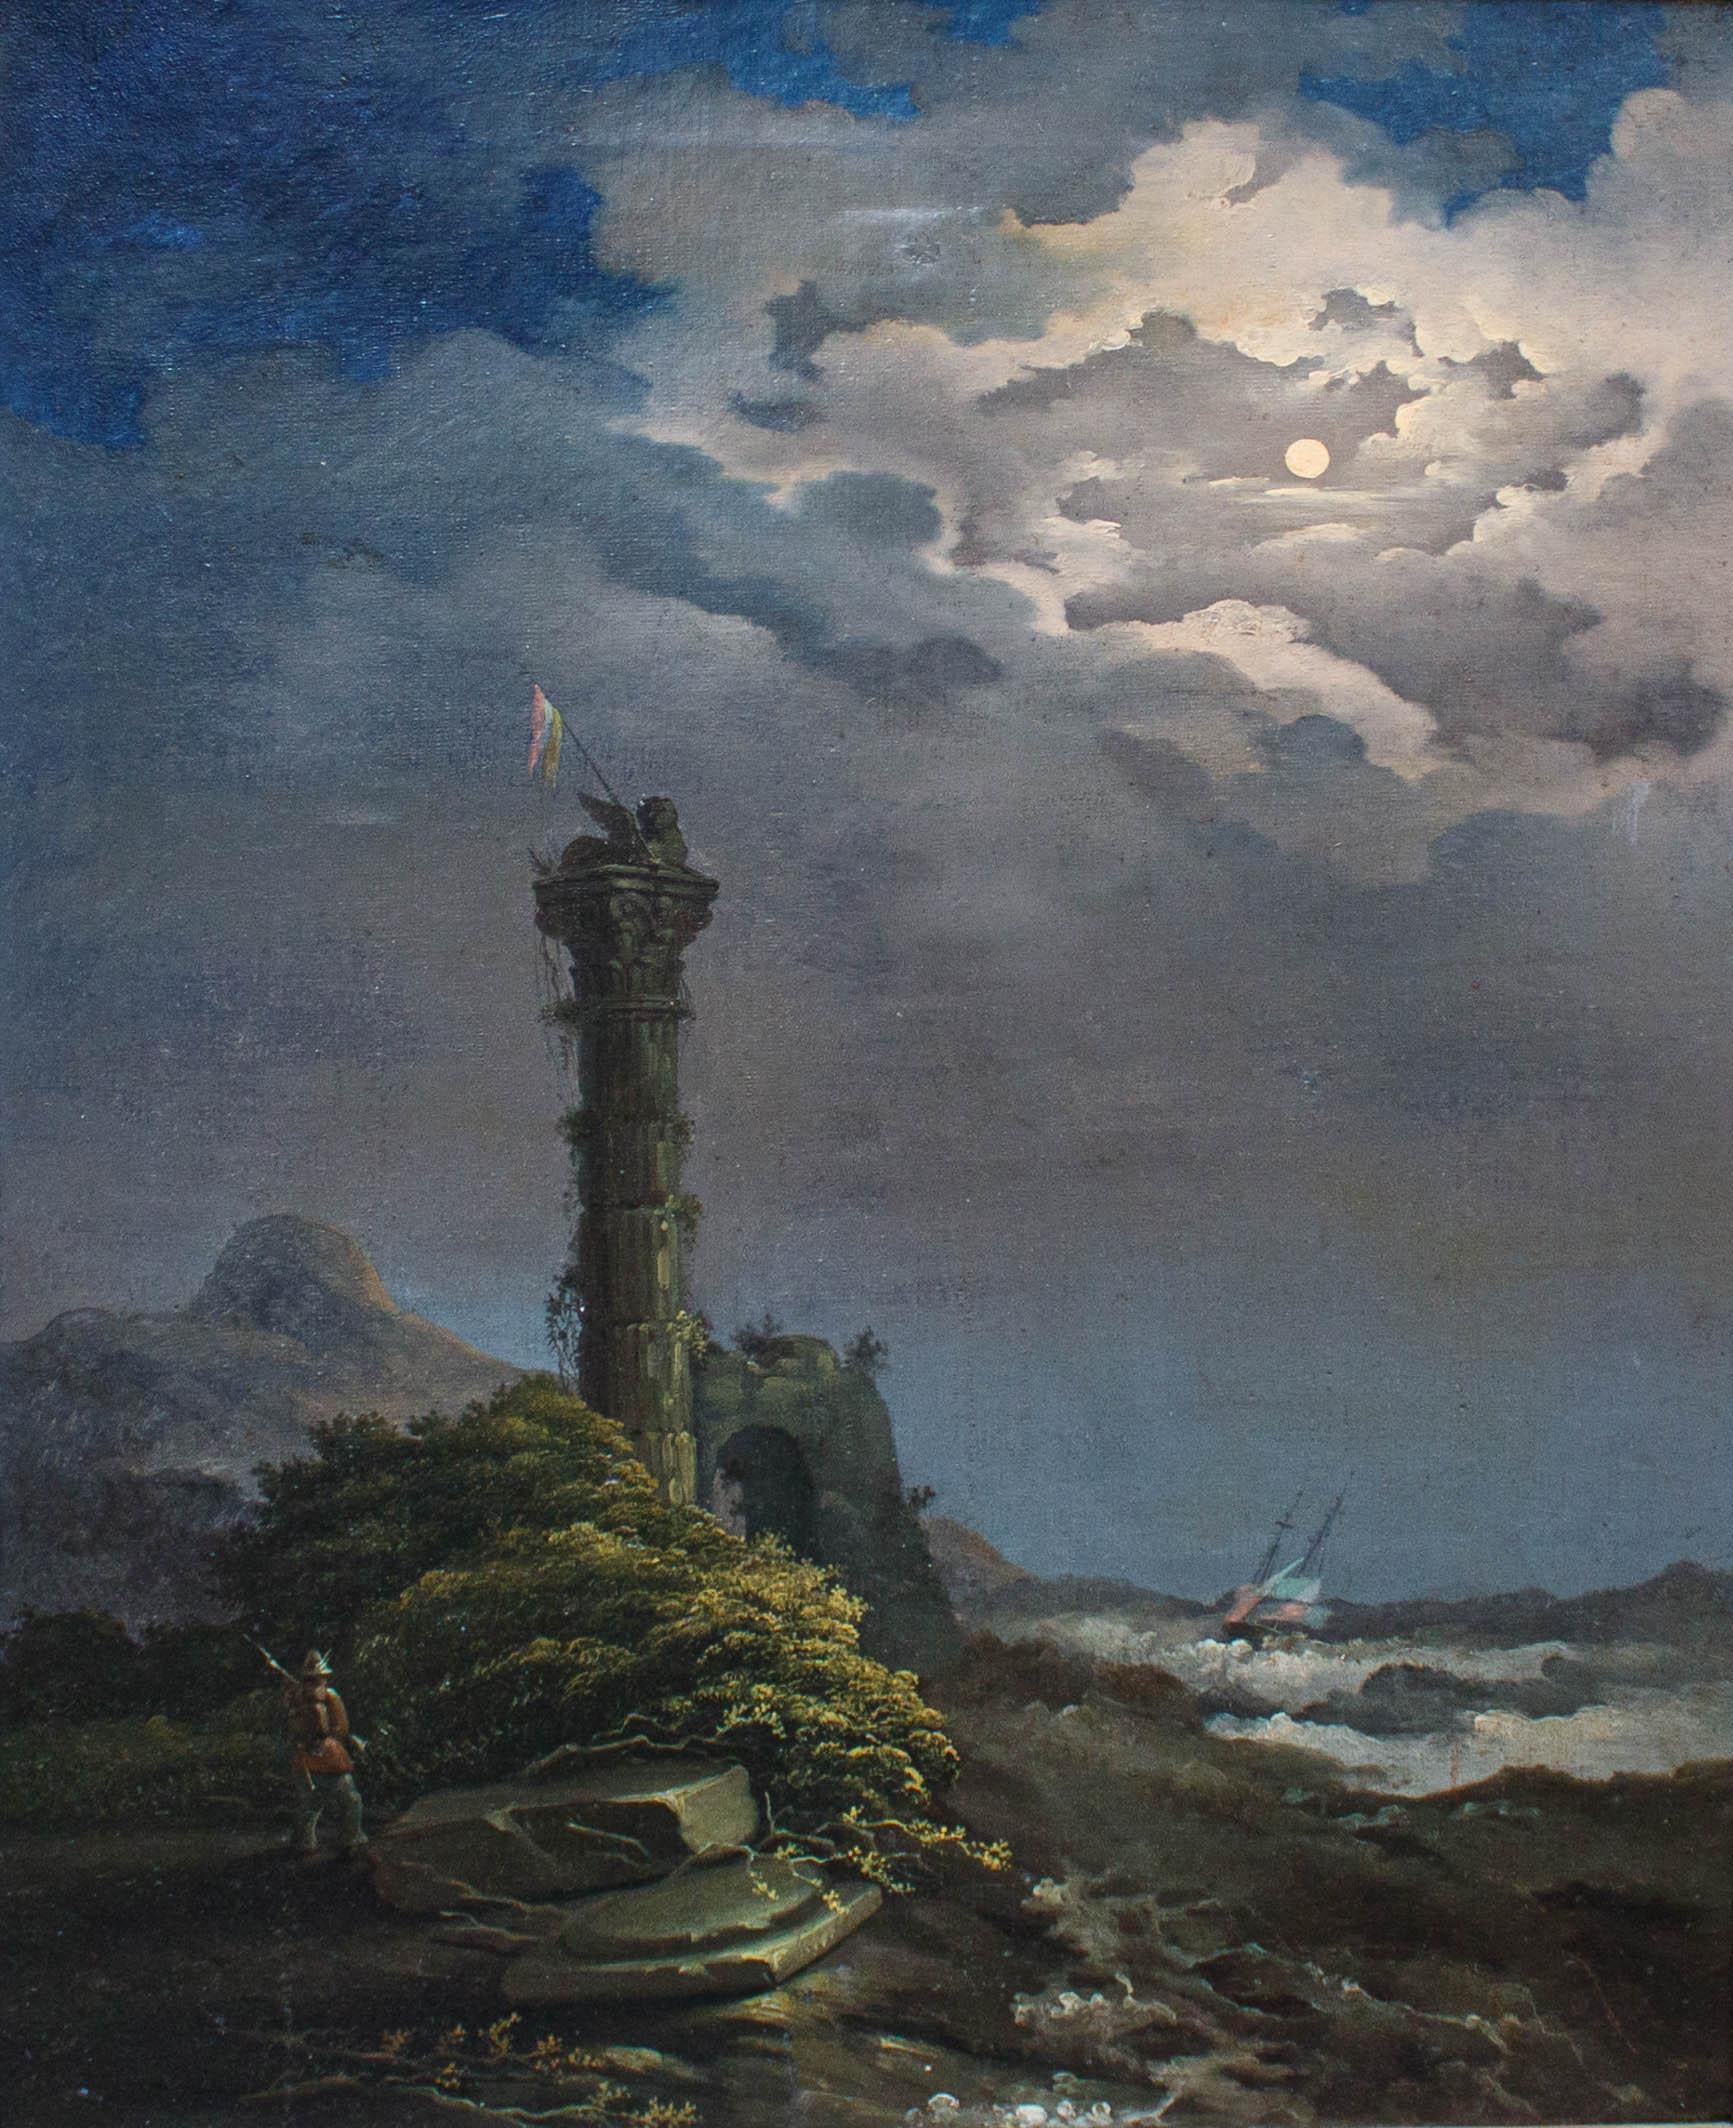 19th century

Moonlit landscape

Measures: Oil on canvas, 67 x 51.5 cm

With frame 75 x 59 cm

Signed lower left “Luigi Giavazzi”

The landscape illuminated by the nocturnal light of the moon that illuminates the sky depicts a collision